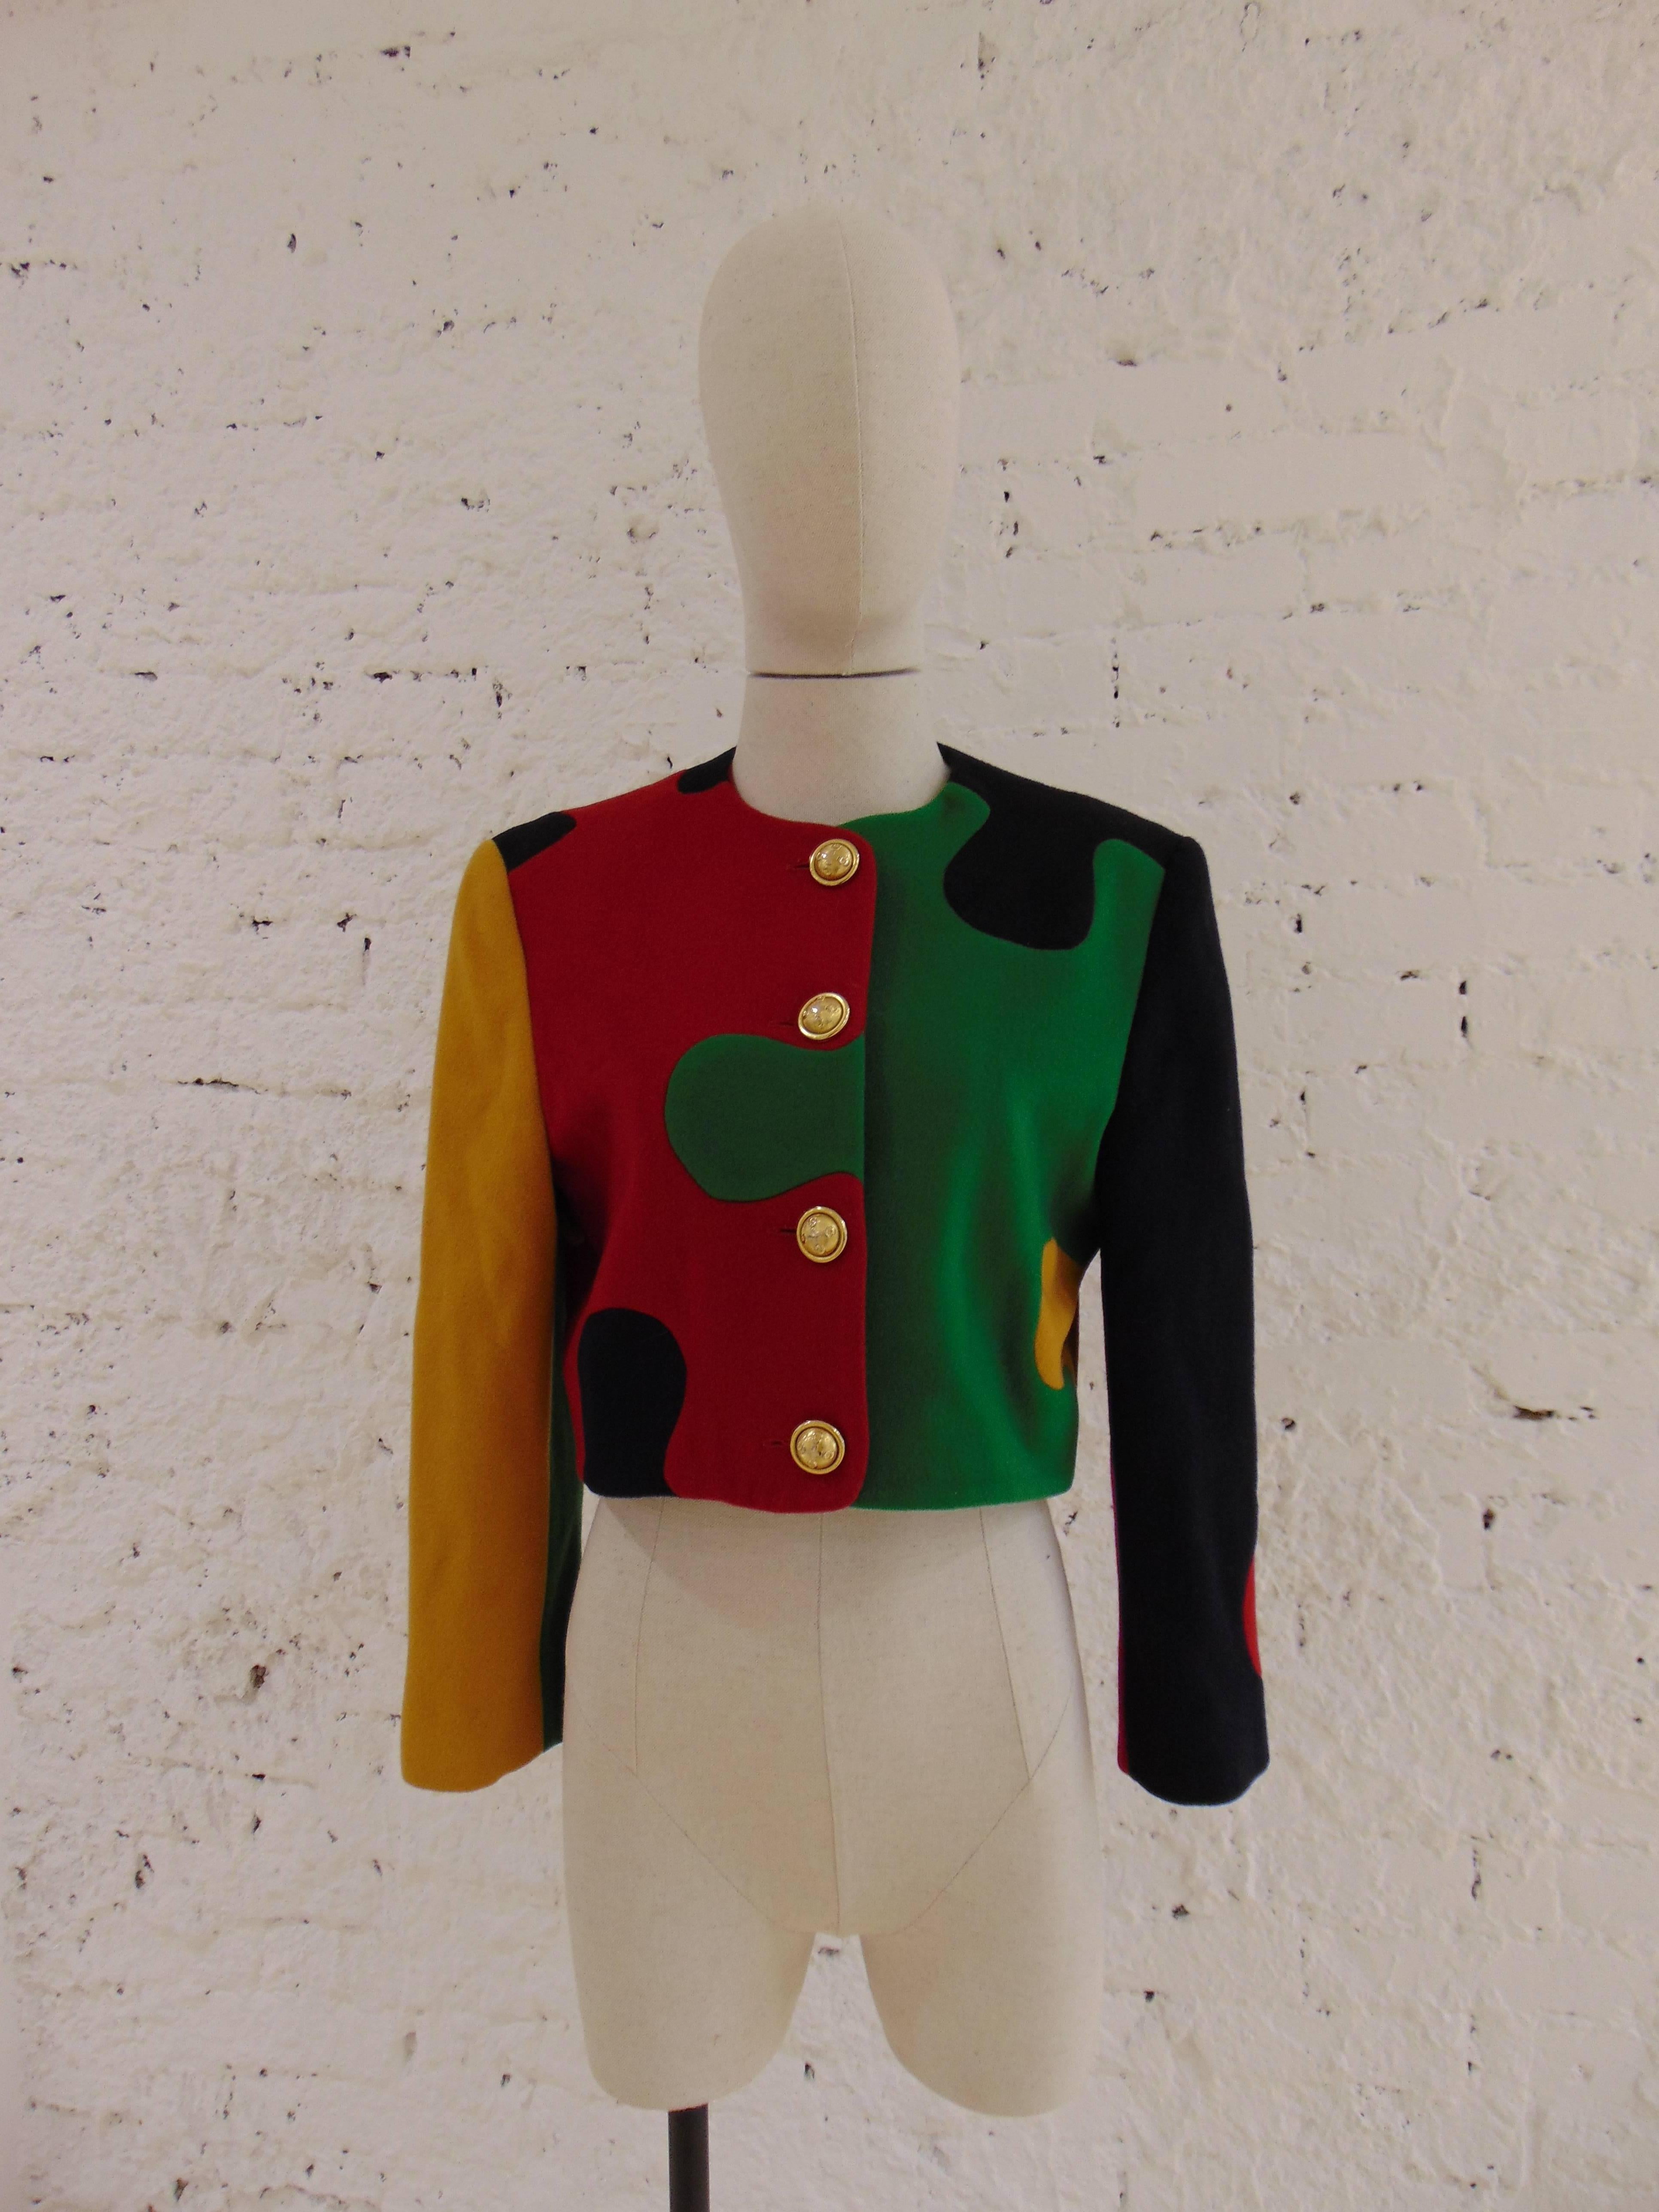 Iconic vintage Franco Moschino puzzle jacket
A Moschino Puzzle Jacket, 1990s, with black, yellow, red and green puzzle pieces, goldtone buttons, fully lined. 
totally made in italy
size 40 it